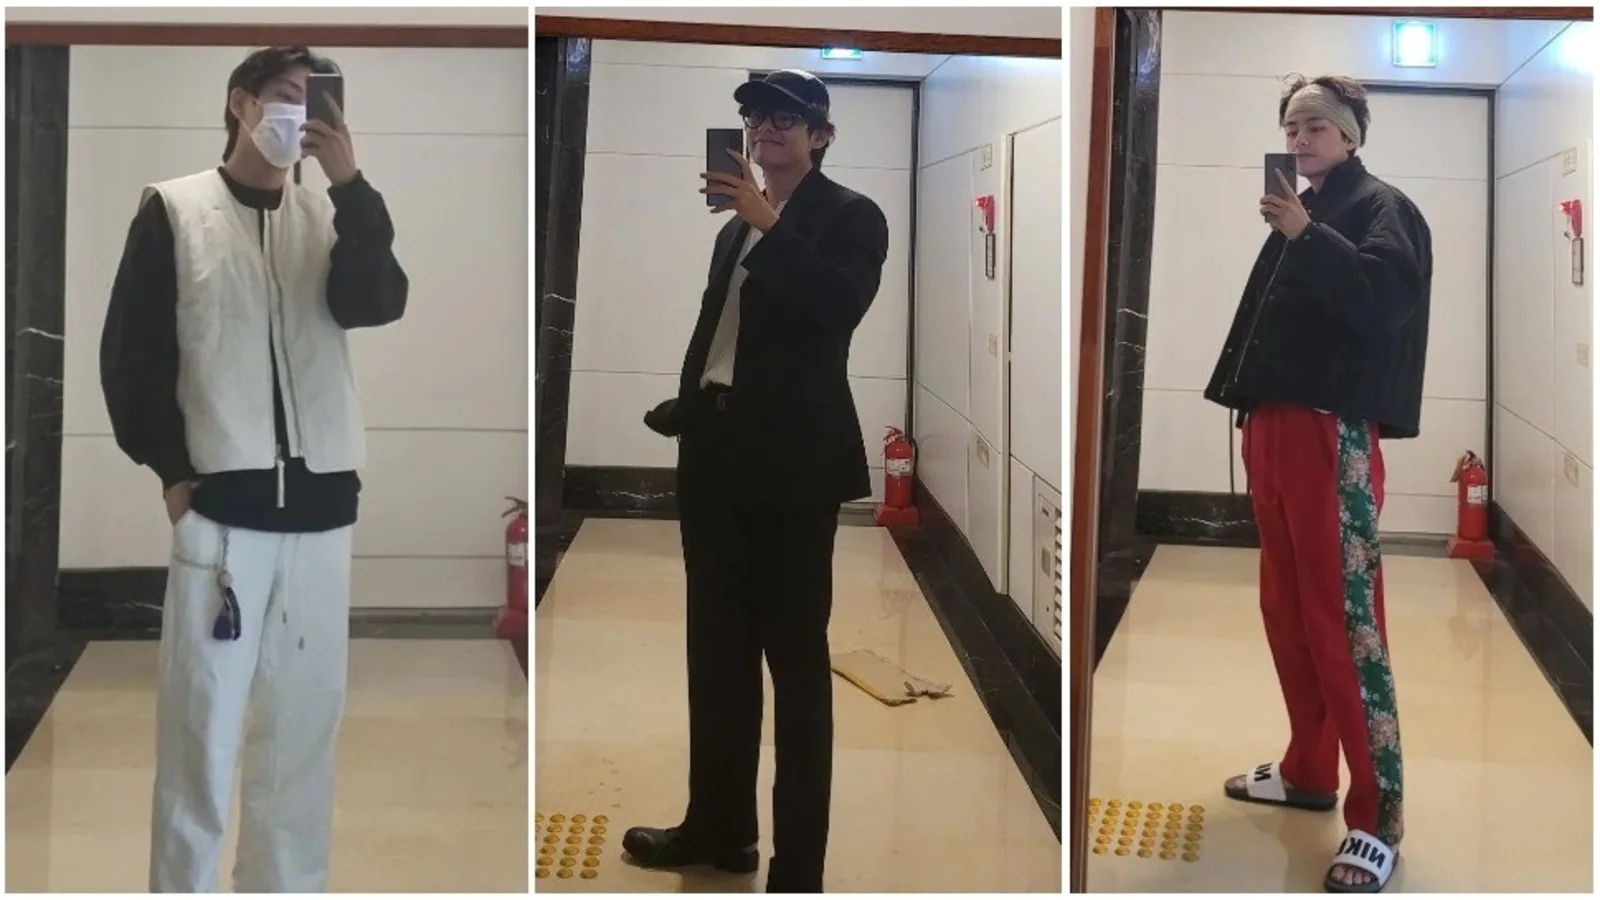 BTS ARMY calls V’s 10 mirror selfies ‘boyfriend material’, asks Jin to step in: ‘Please represent us in comment section’